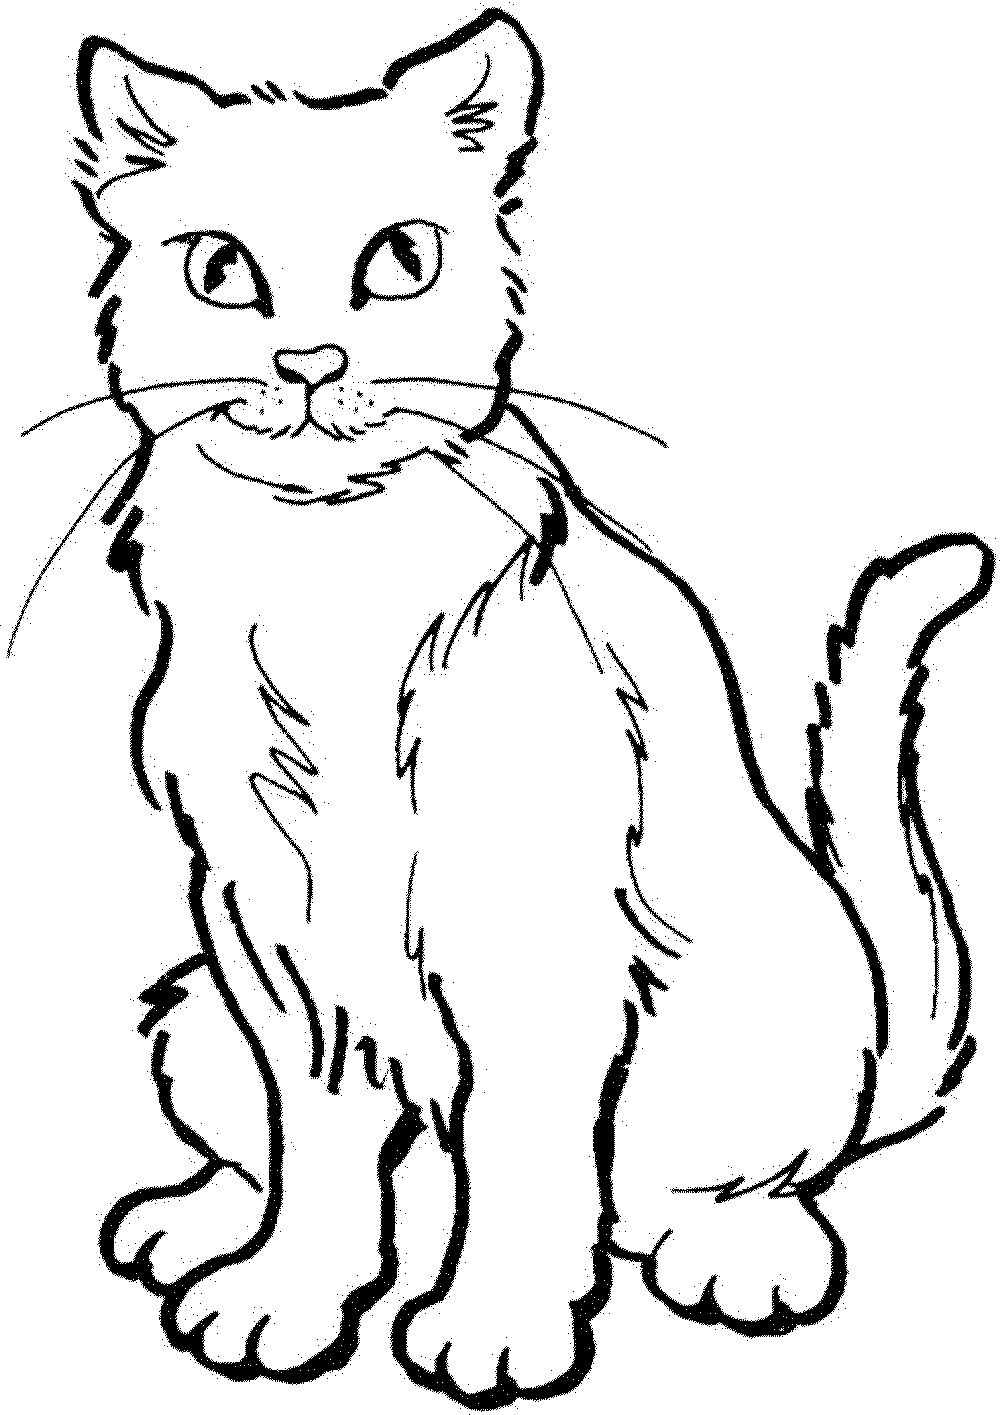 Download warrior-cats-coloring-pages | | BestAppsForKids.com